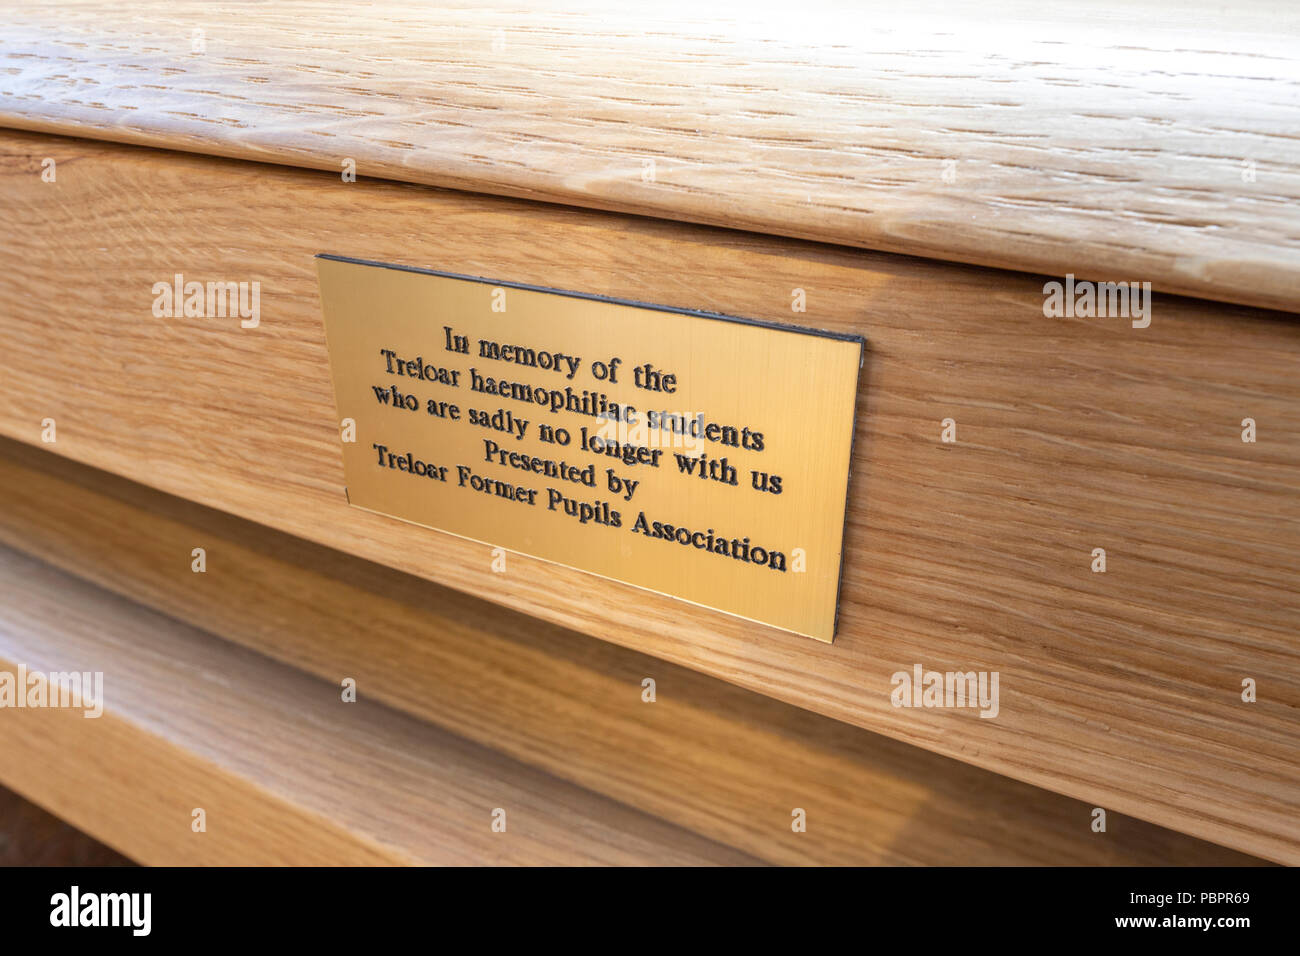 Holybourne, Hampshire, 28 July 2018. The plaque on a solid oak pew in the Church of the Holy Rood in Holybourne, near Alton, Hampshire dedicated on Saturday 28th July 2018 to the memory of the haemophiliacs who died as the result of being treated with contaminated blood products while at the nearby Treloar College.It is thought that 72 pupils have died out of 89 infected. The inscription reads,'In memory of the Treloar haemophiliac students who are sadly no longer with us. Presented by Treloar Former Pupils Association' Stock Photo